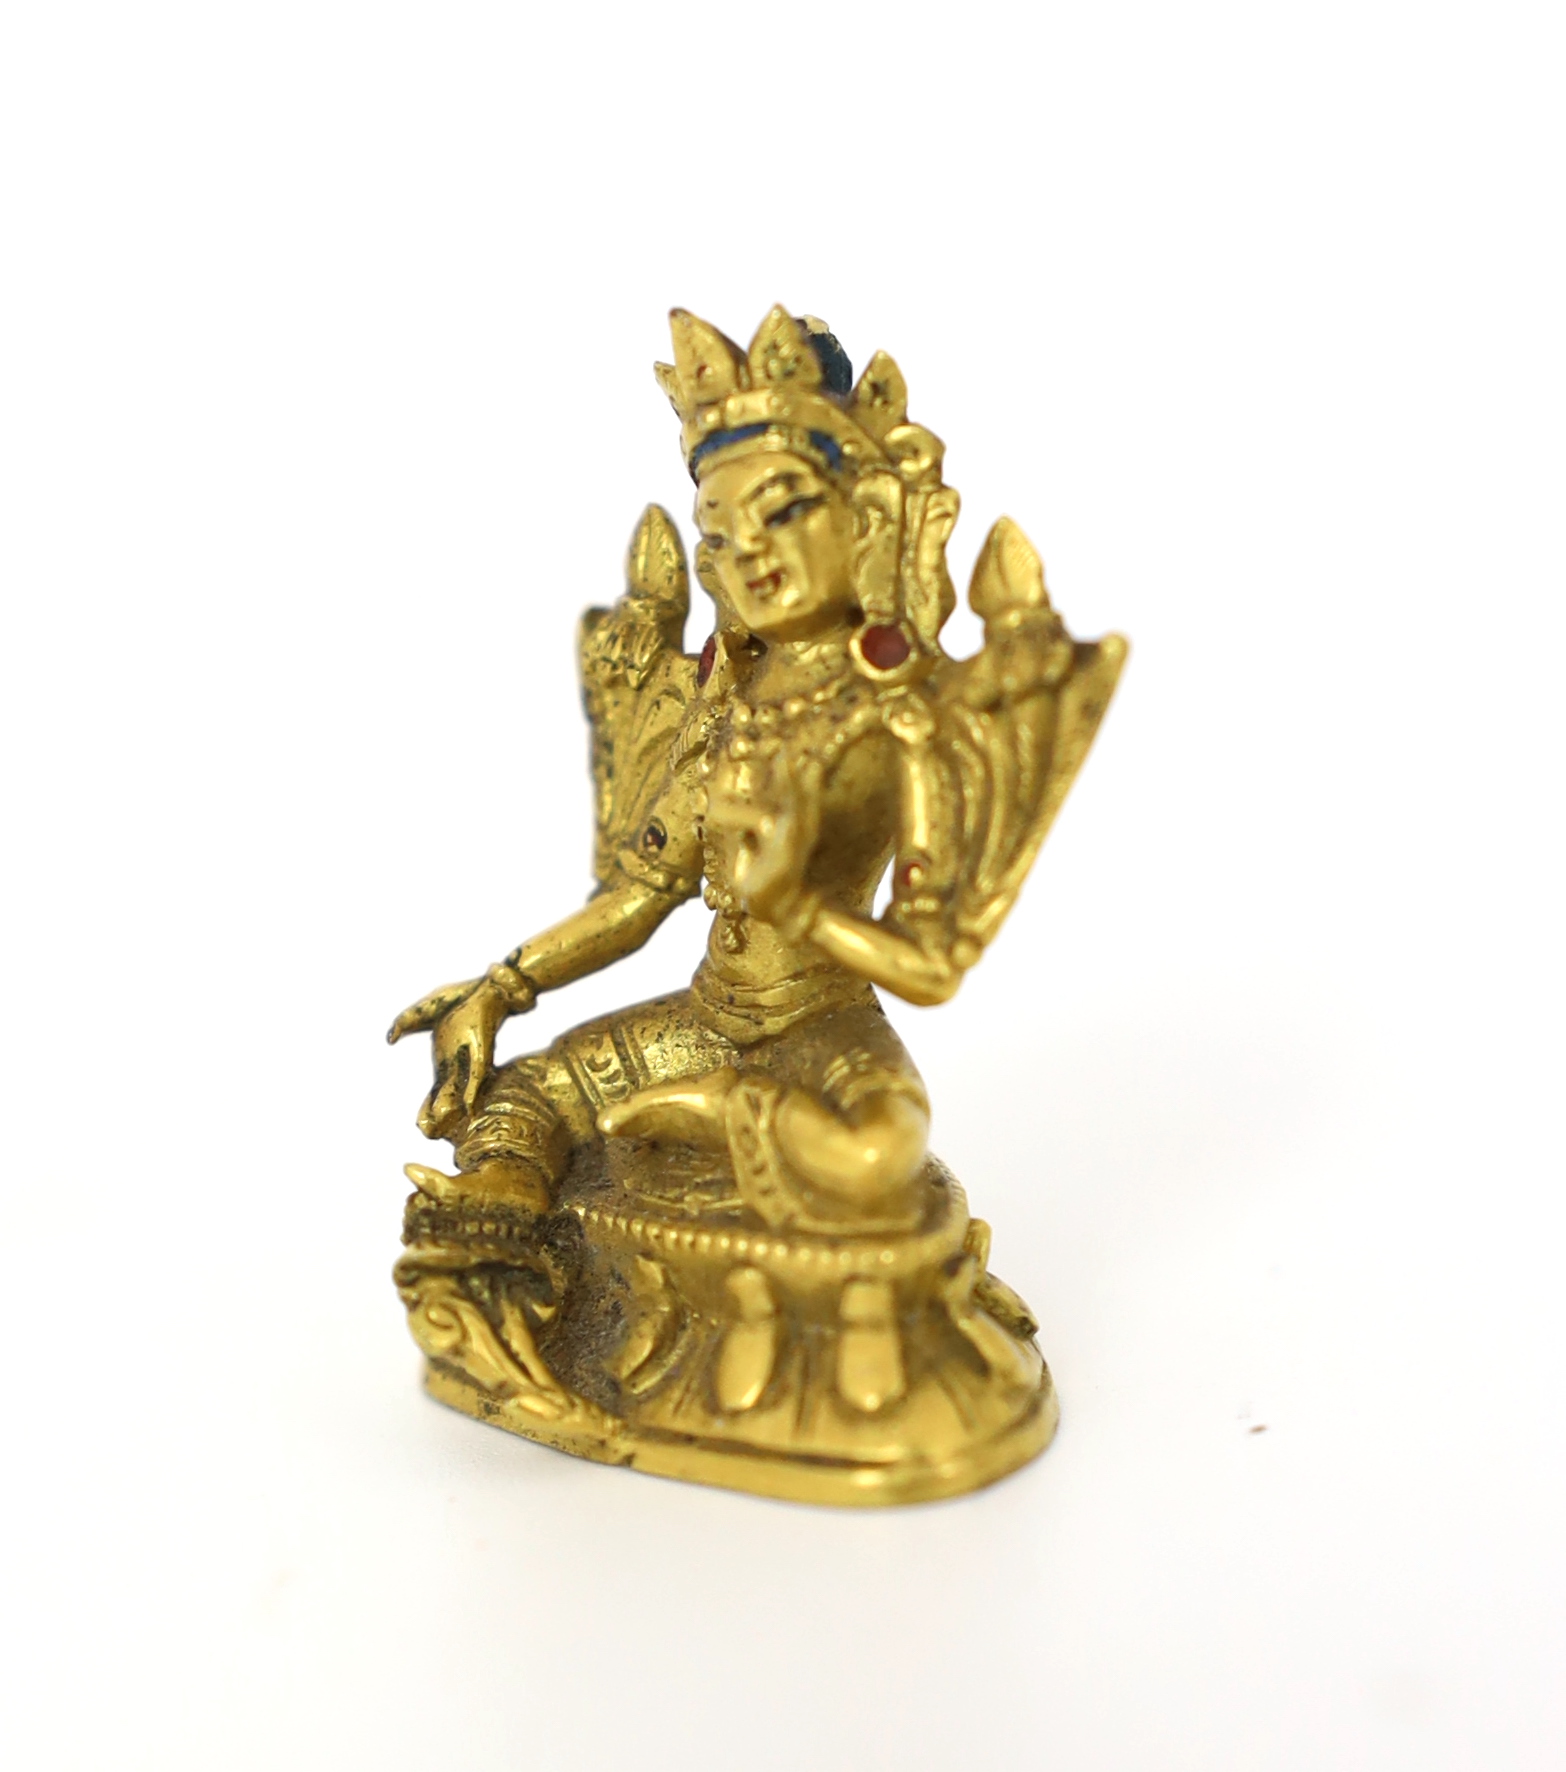 A Tibetan miniature gilt bronze figure of Green Tara, 18th/19th century, 3cm high, Provenance: G. Hawthorn Antiques, 22nd October 2007, Please note this lot attracts an additional import tax of 5% on the hammer price